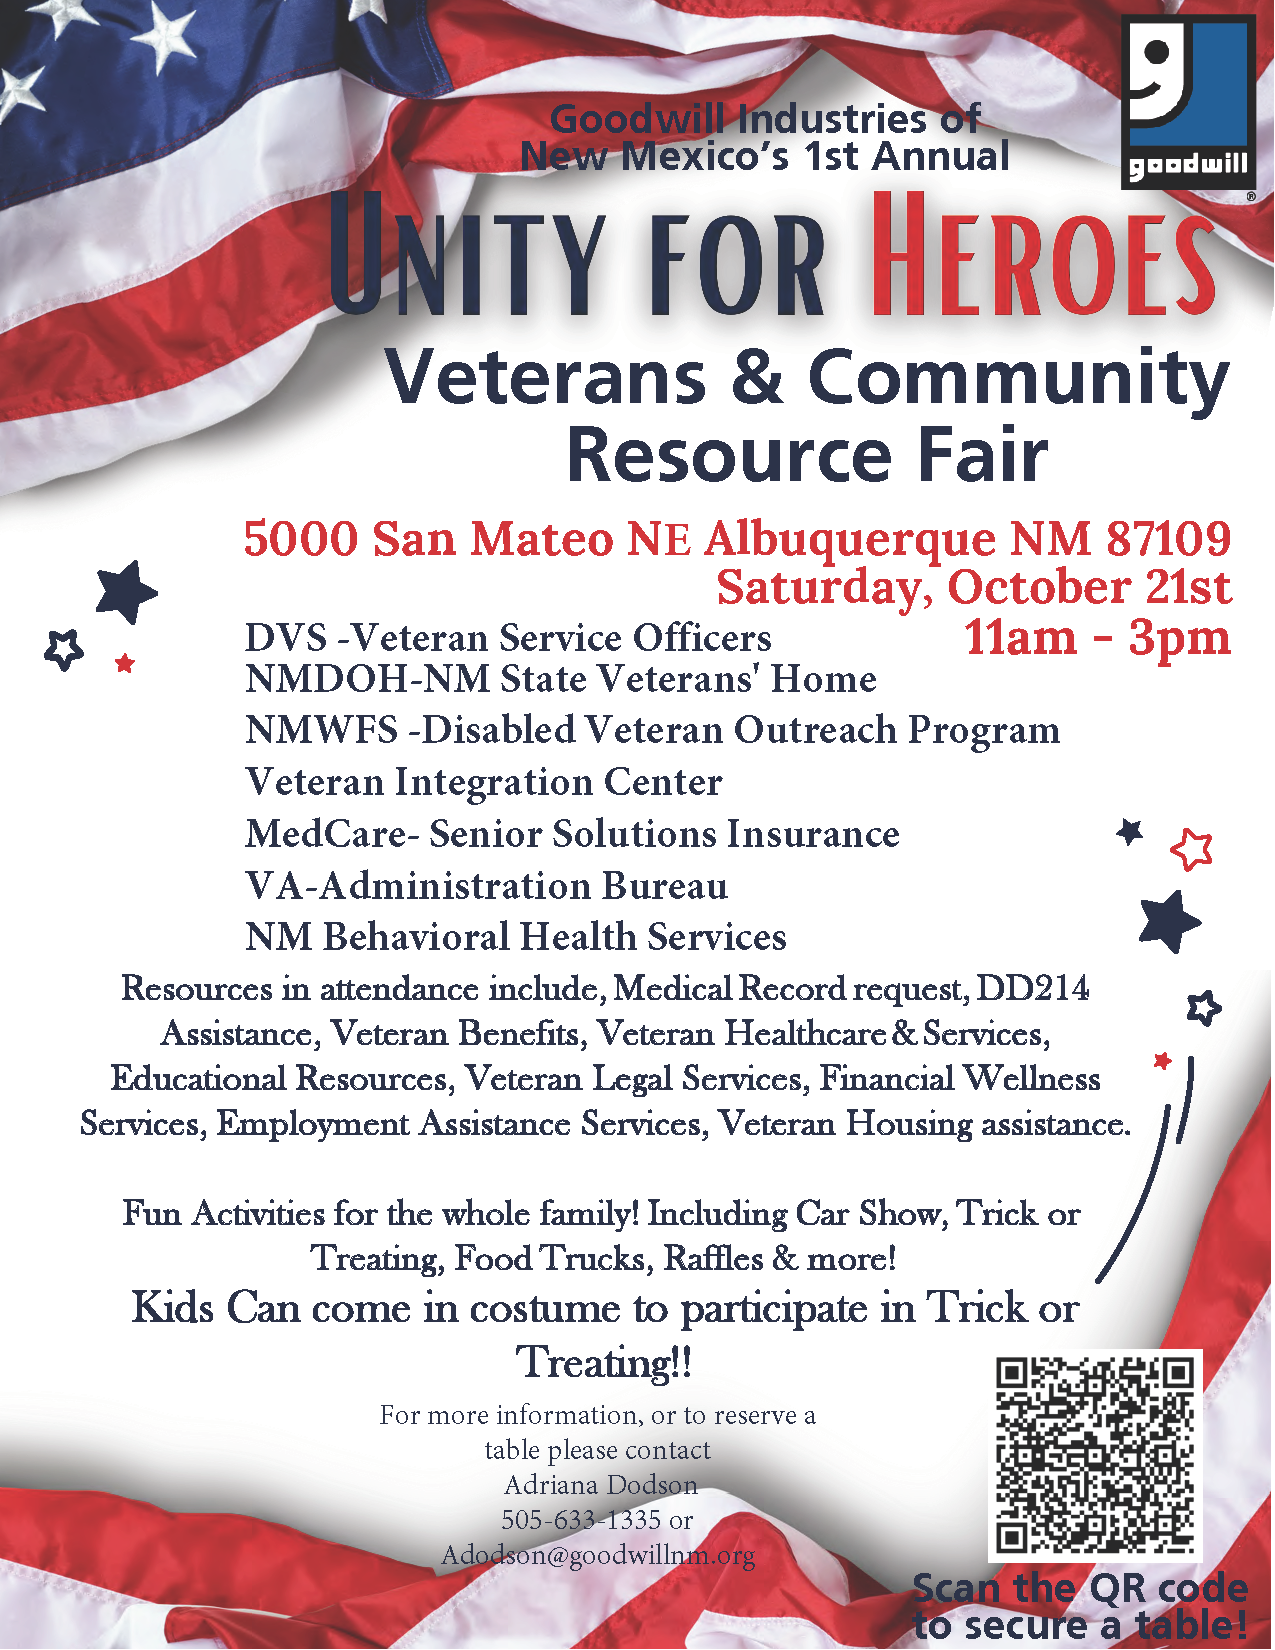 Goodwill Unity for Heroes flyer